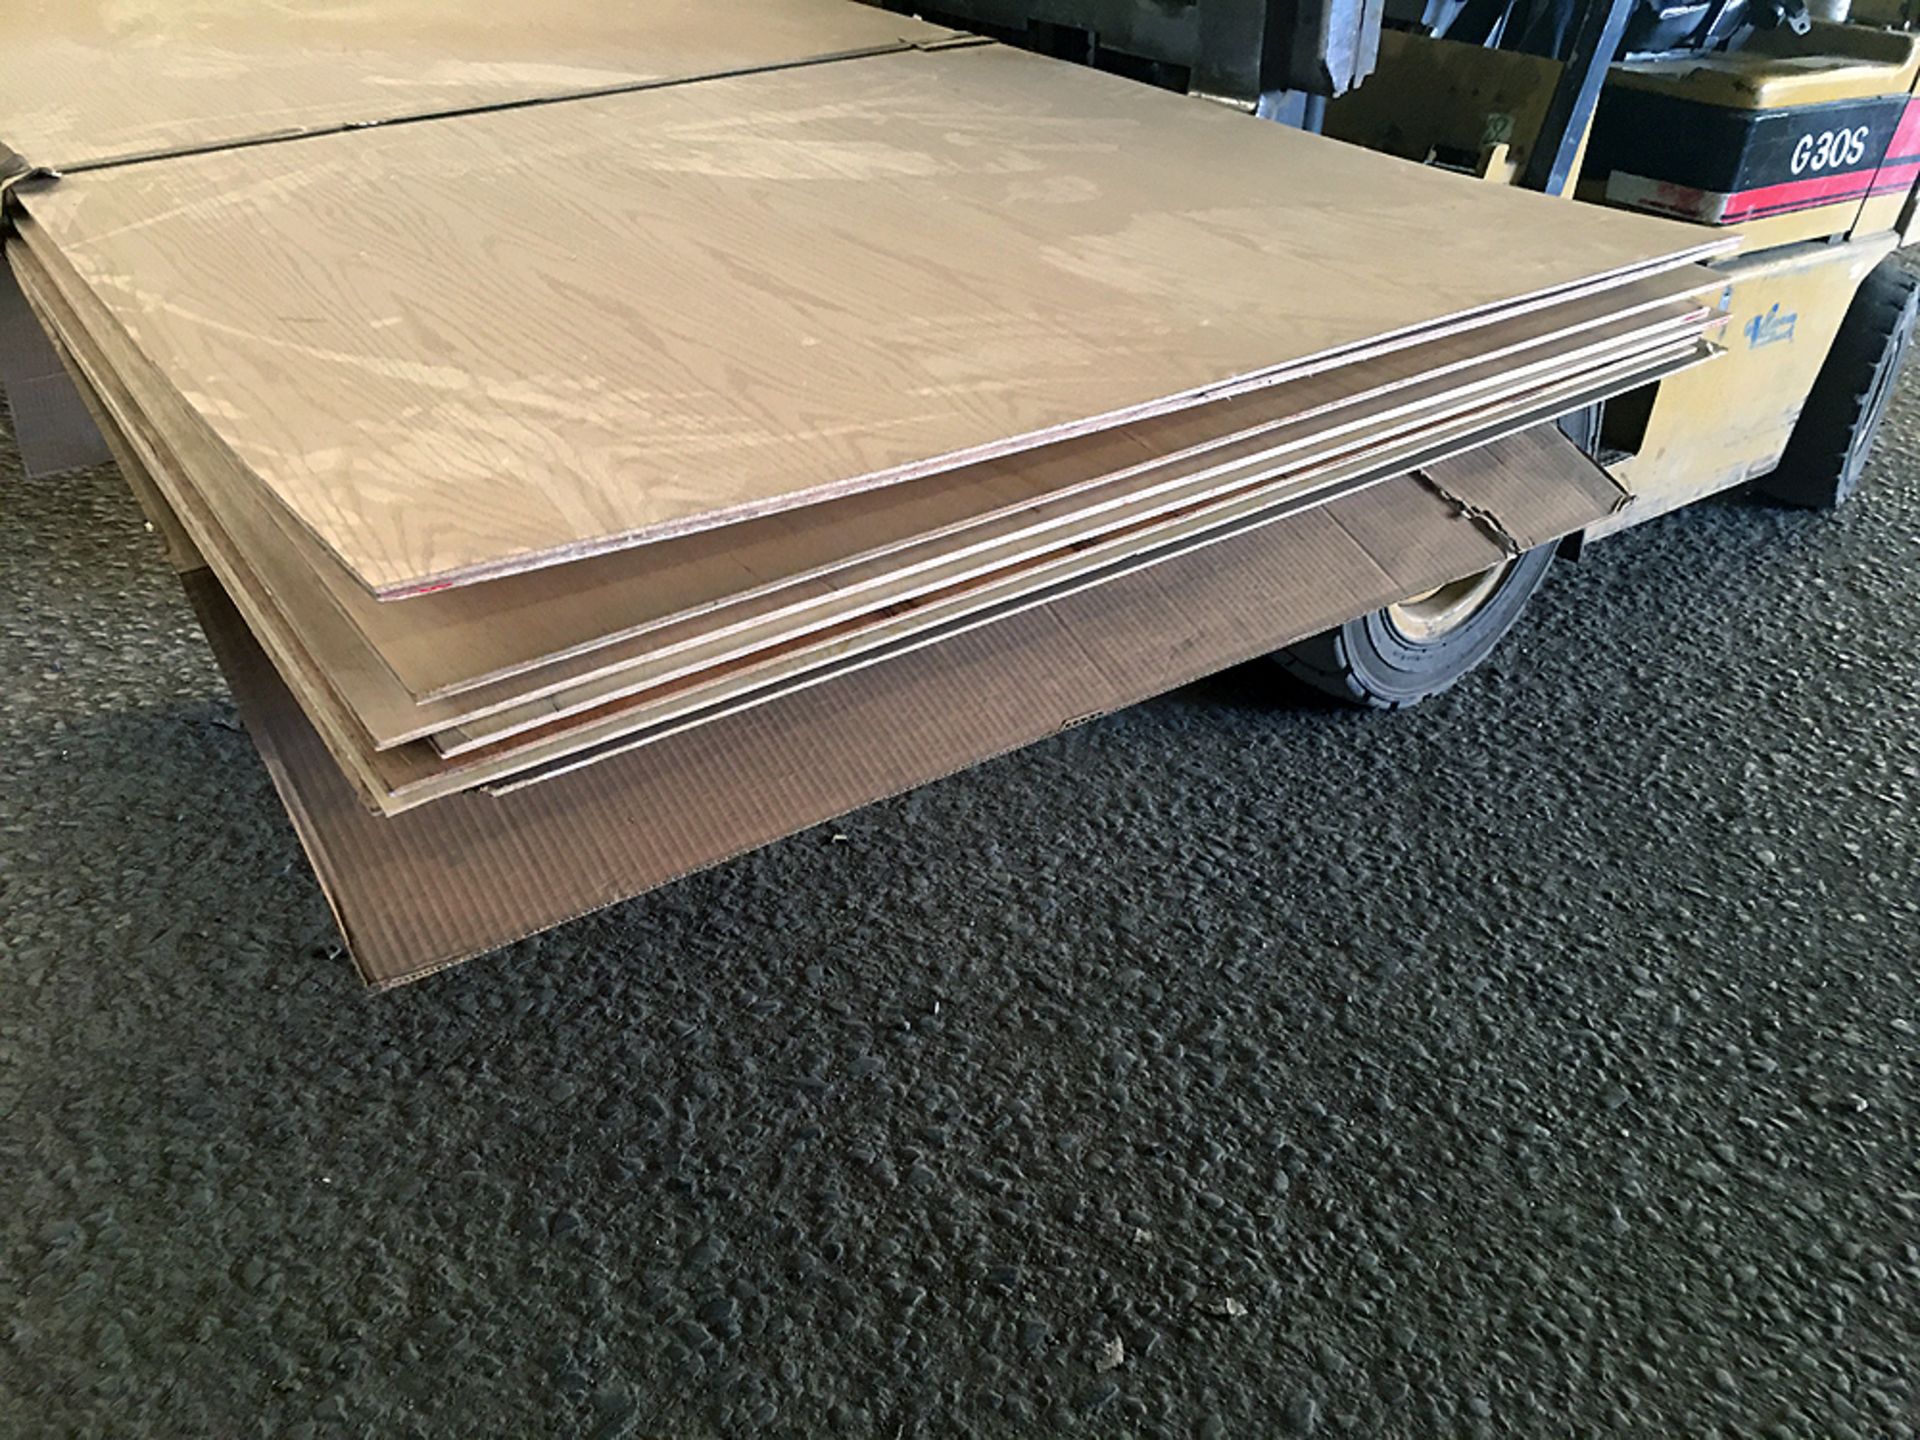 4'x8'x1/4" Thick Oak Plywood Boards - Image 5 of 7